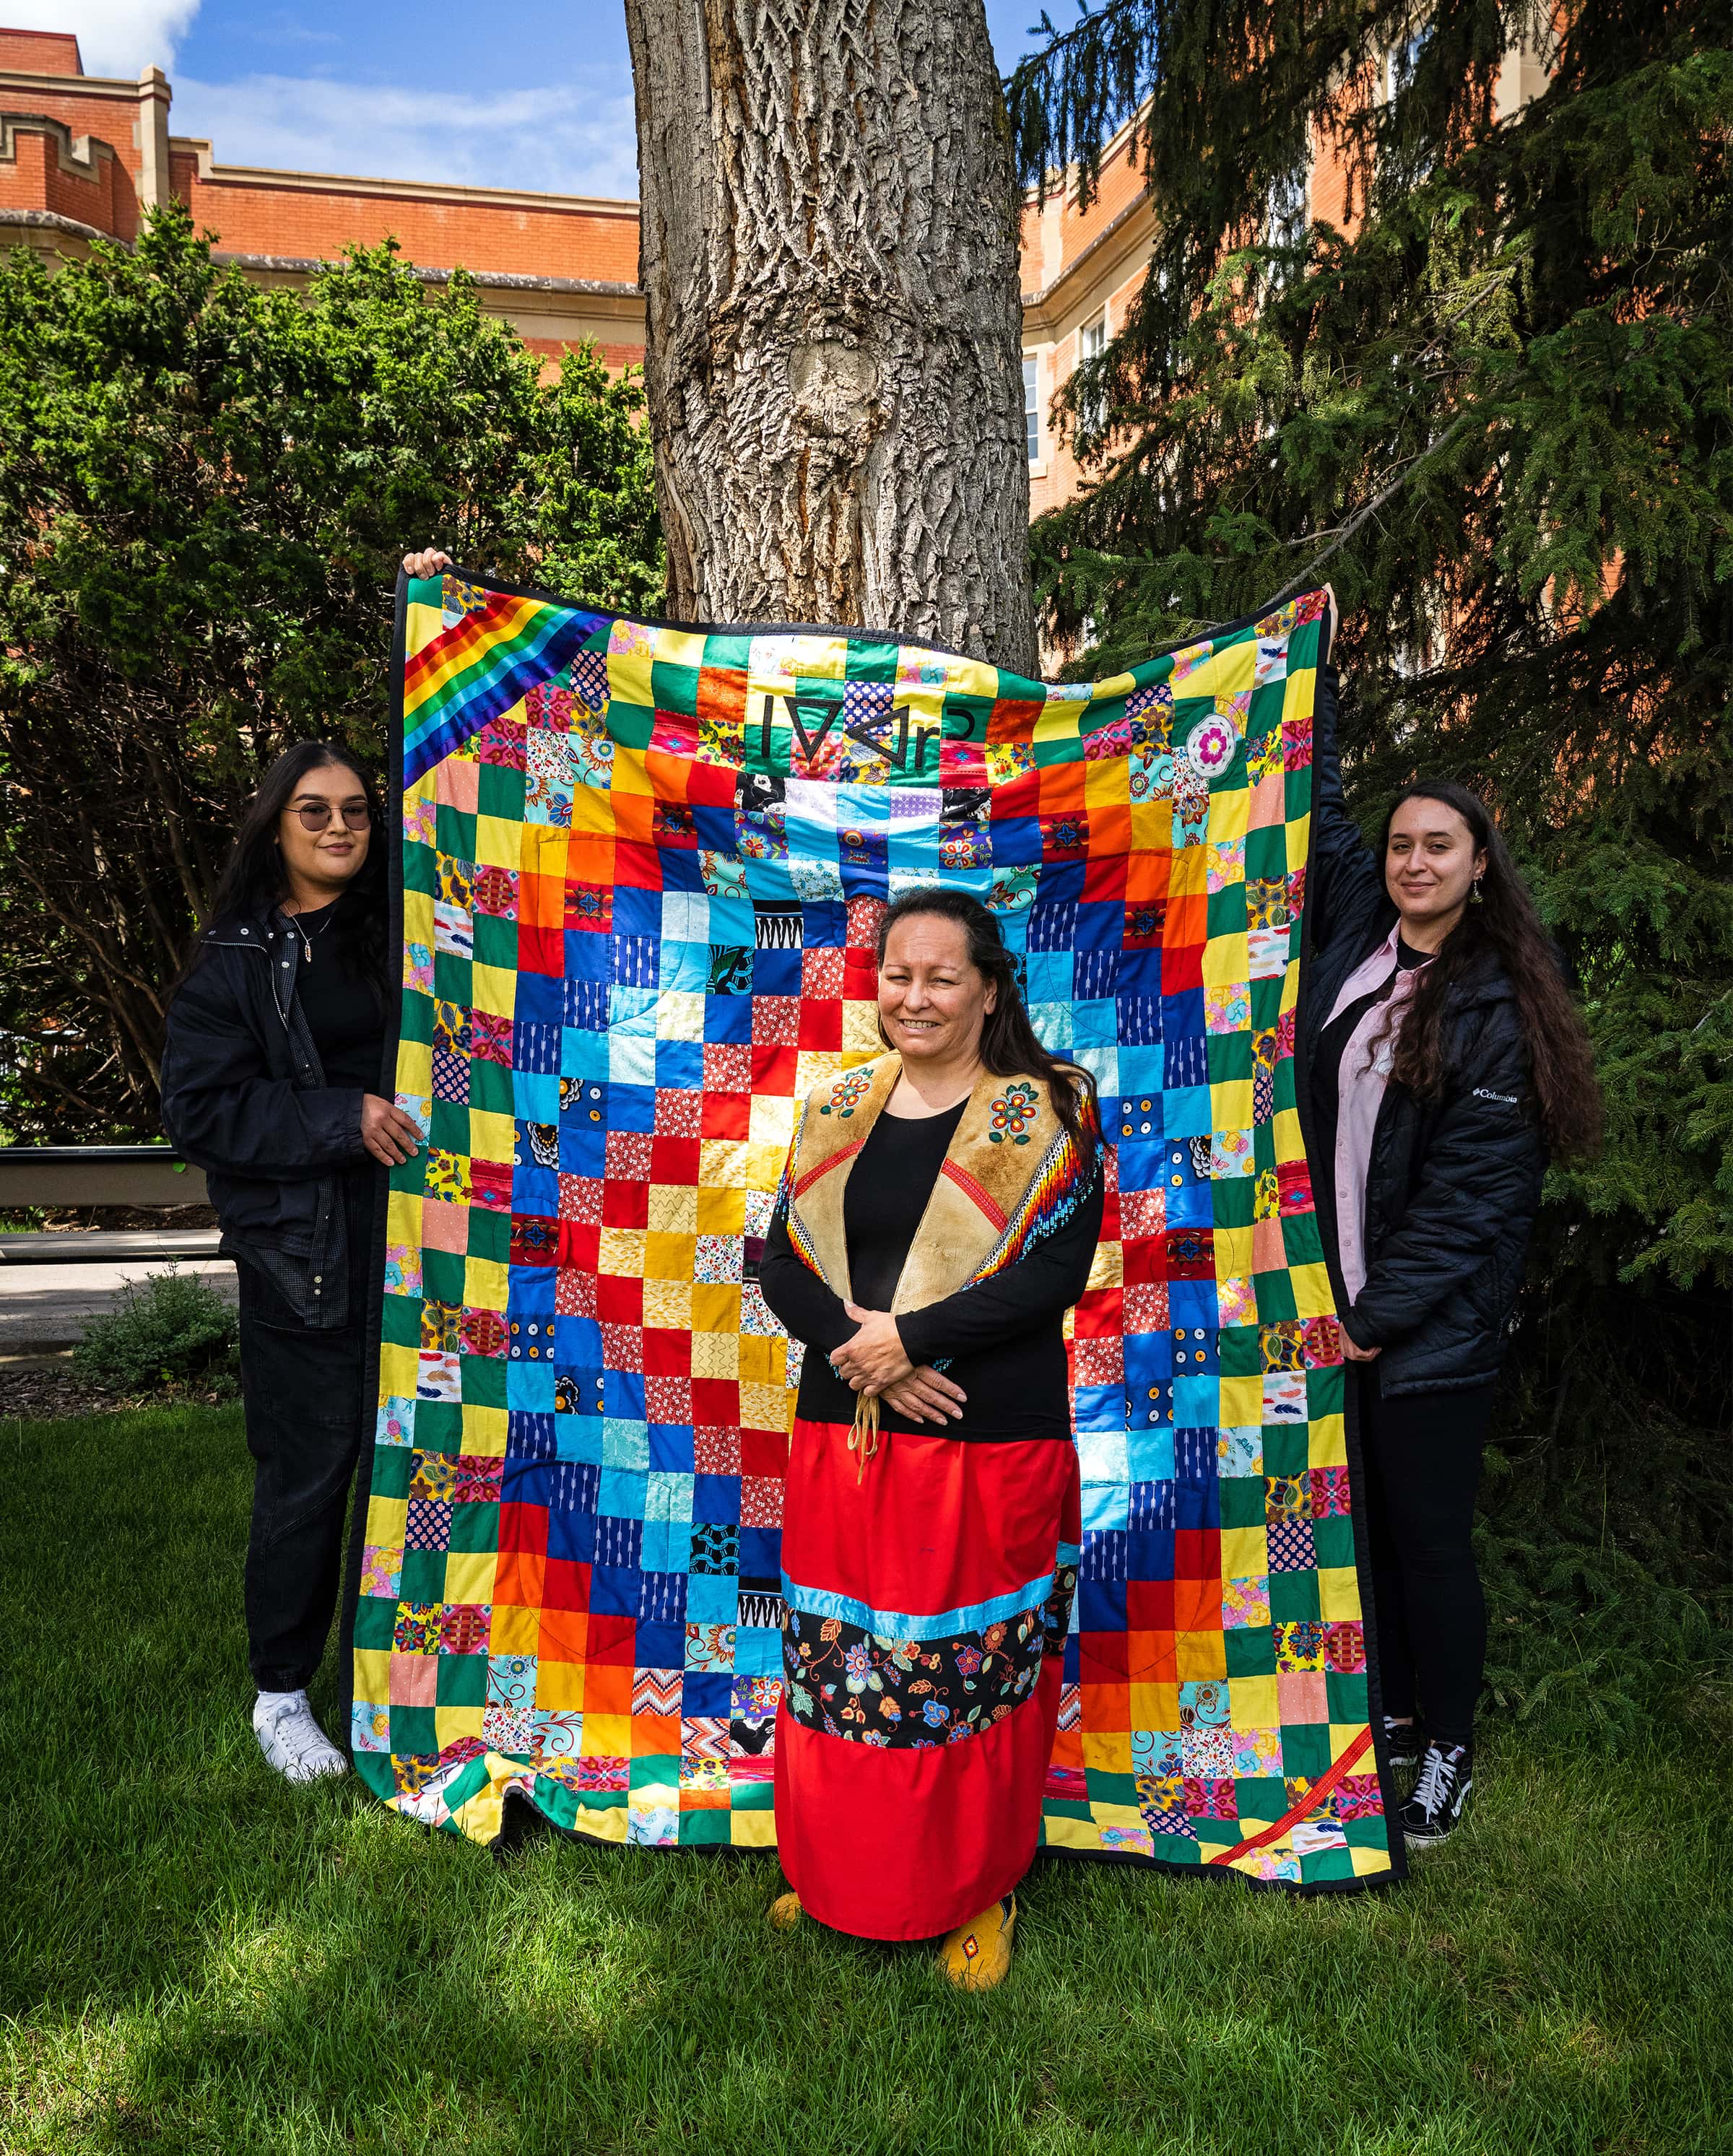 Elder Heather Poitras stands with the ceremonial quilt made for the ISP, held by her daughters.